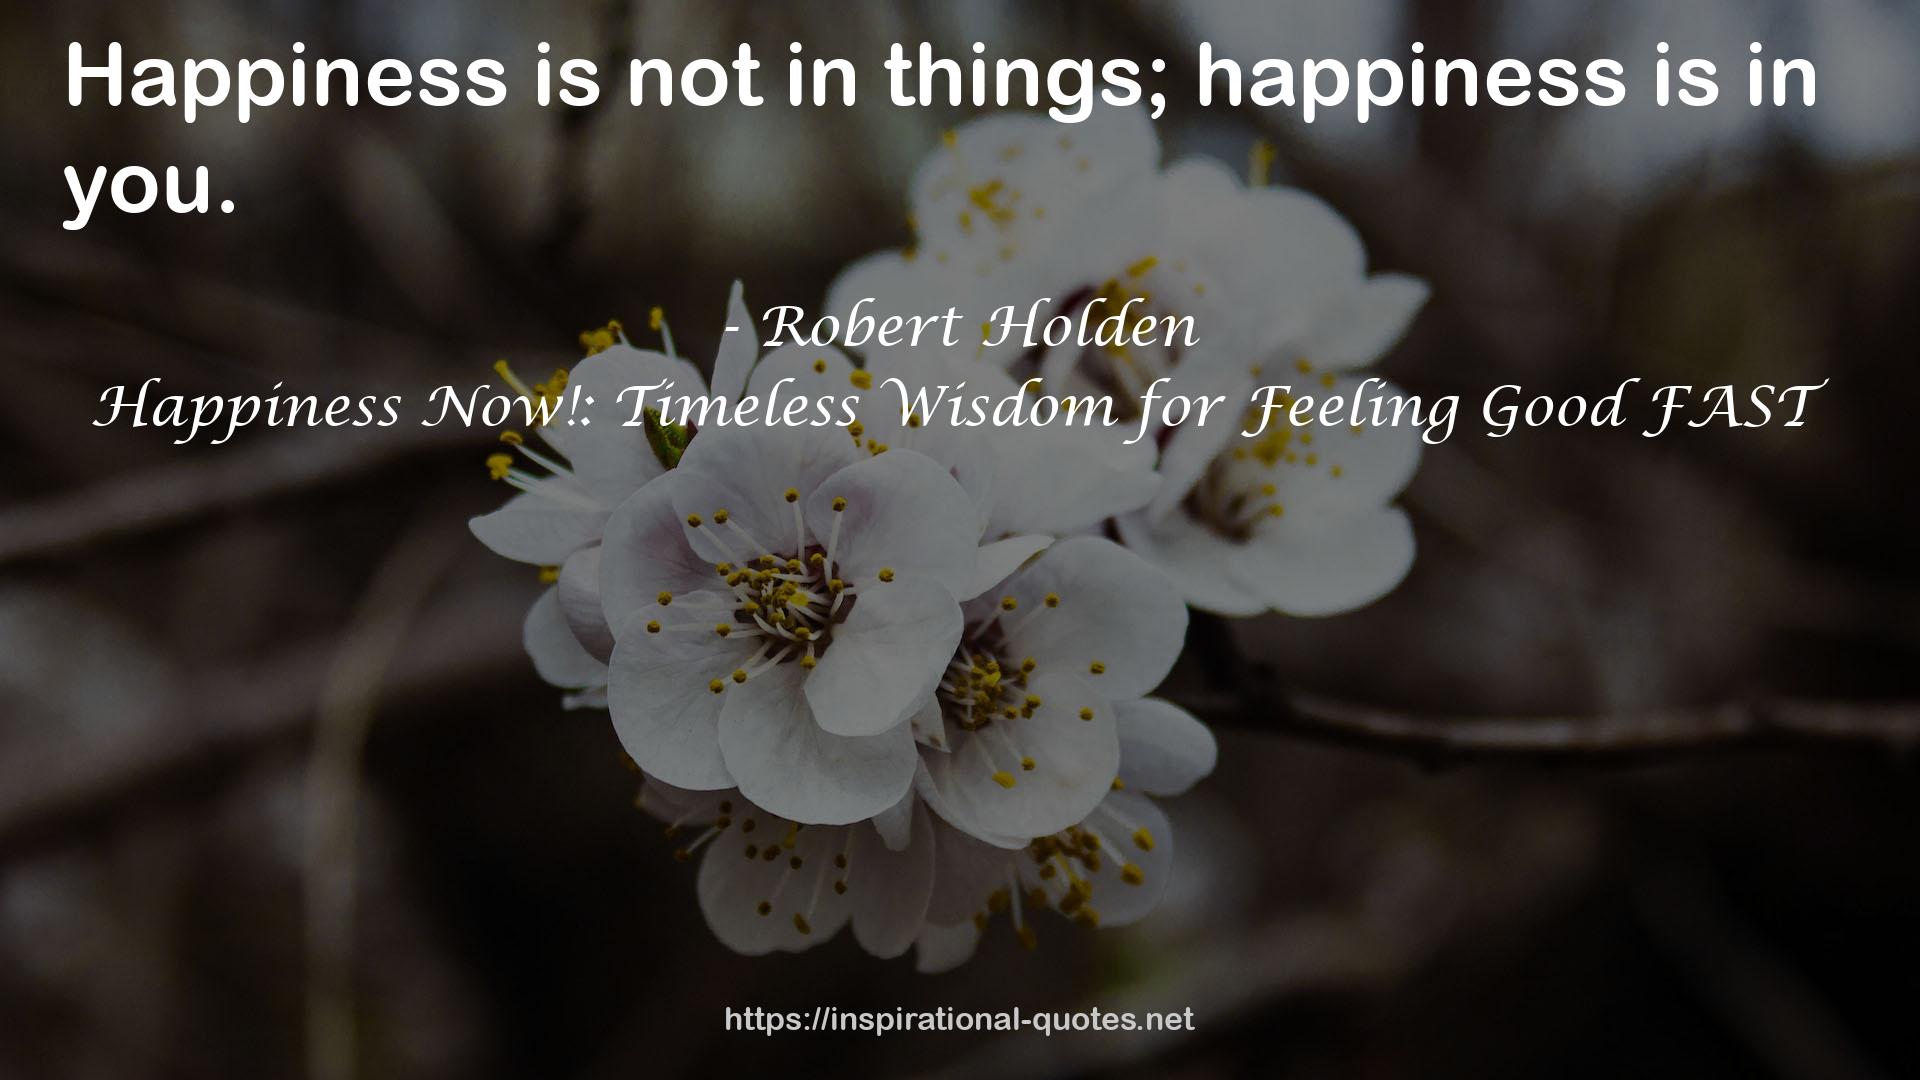 Happiness Now!: Timeless Wisdom for Feeling Good FAST QUOTES